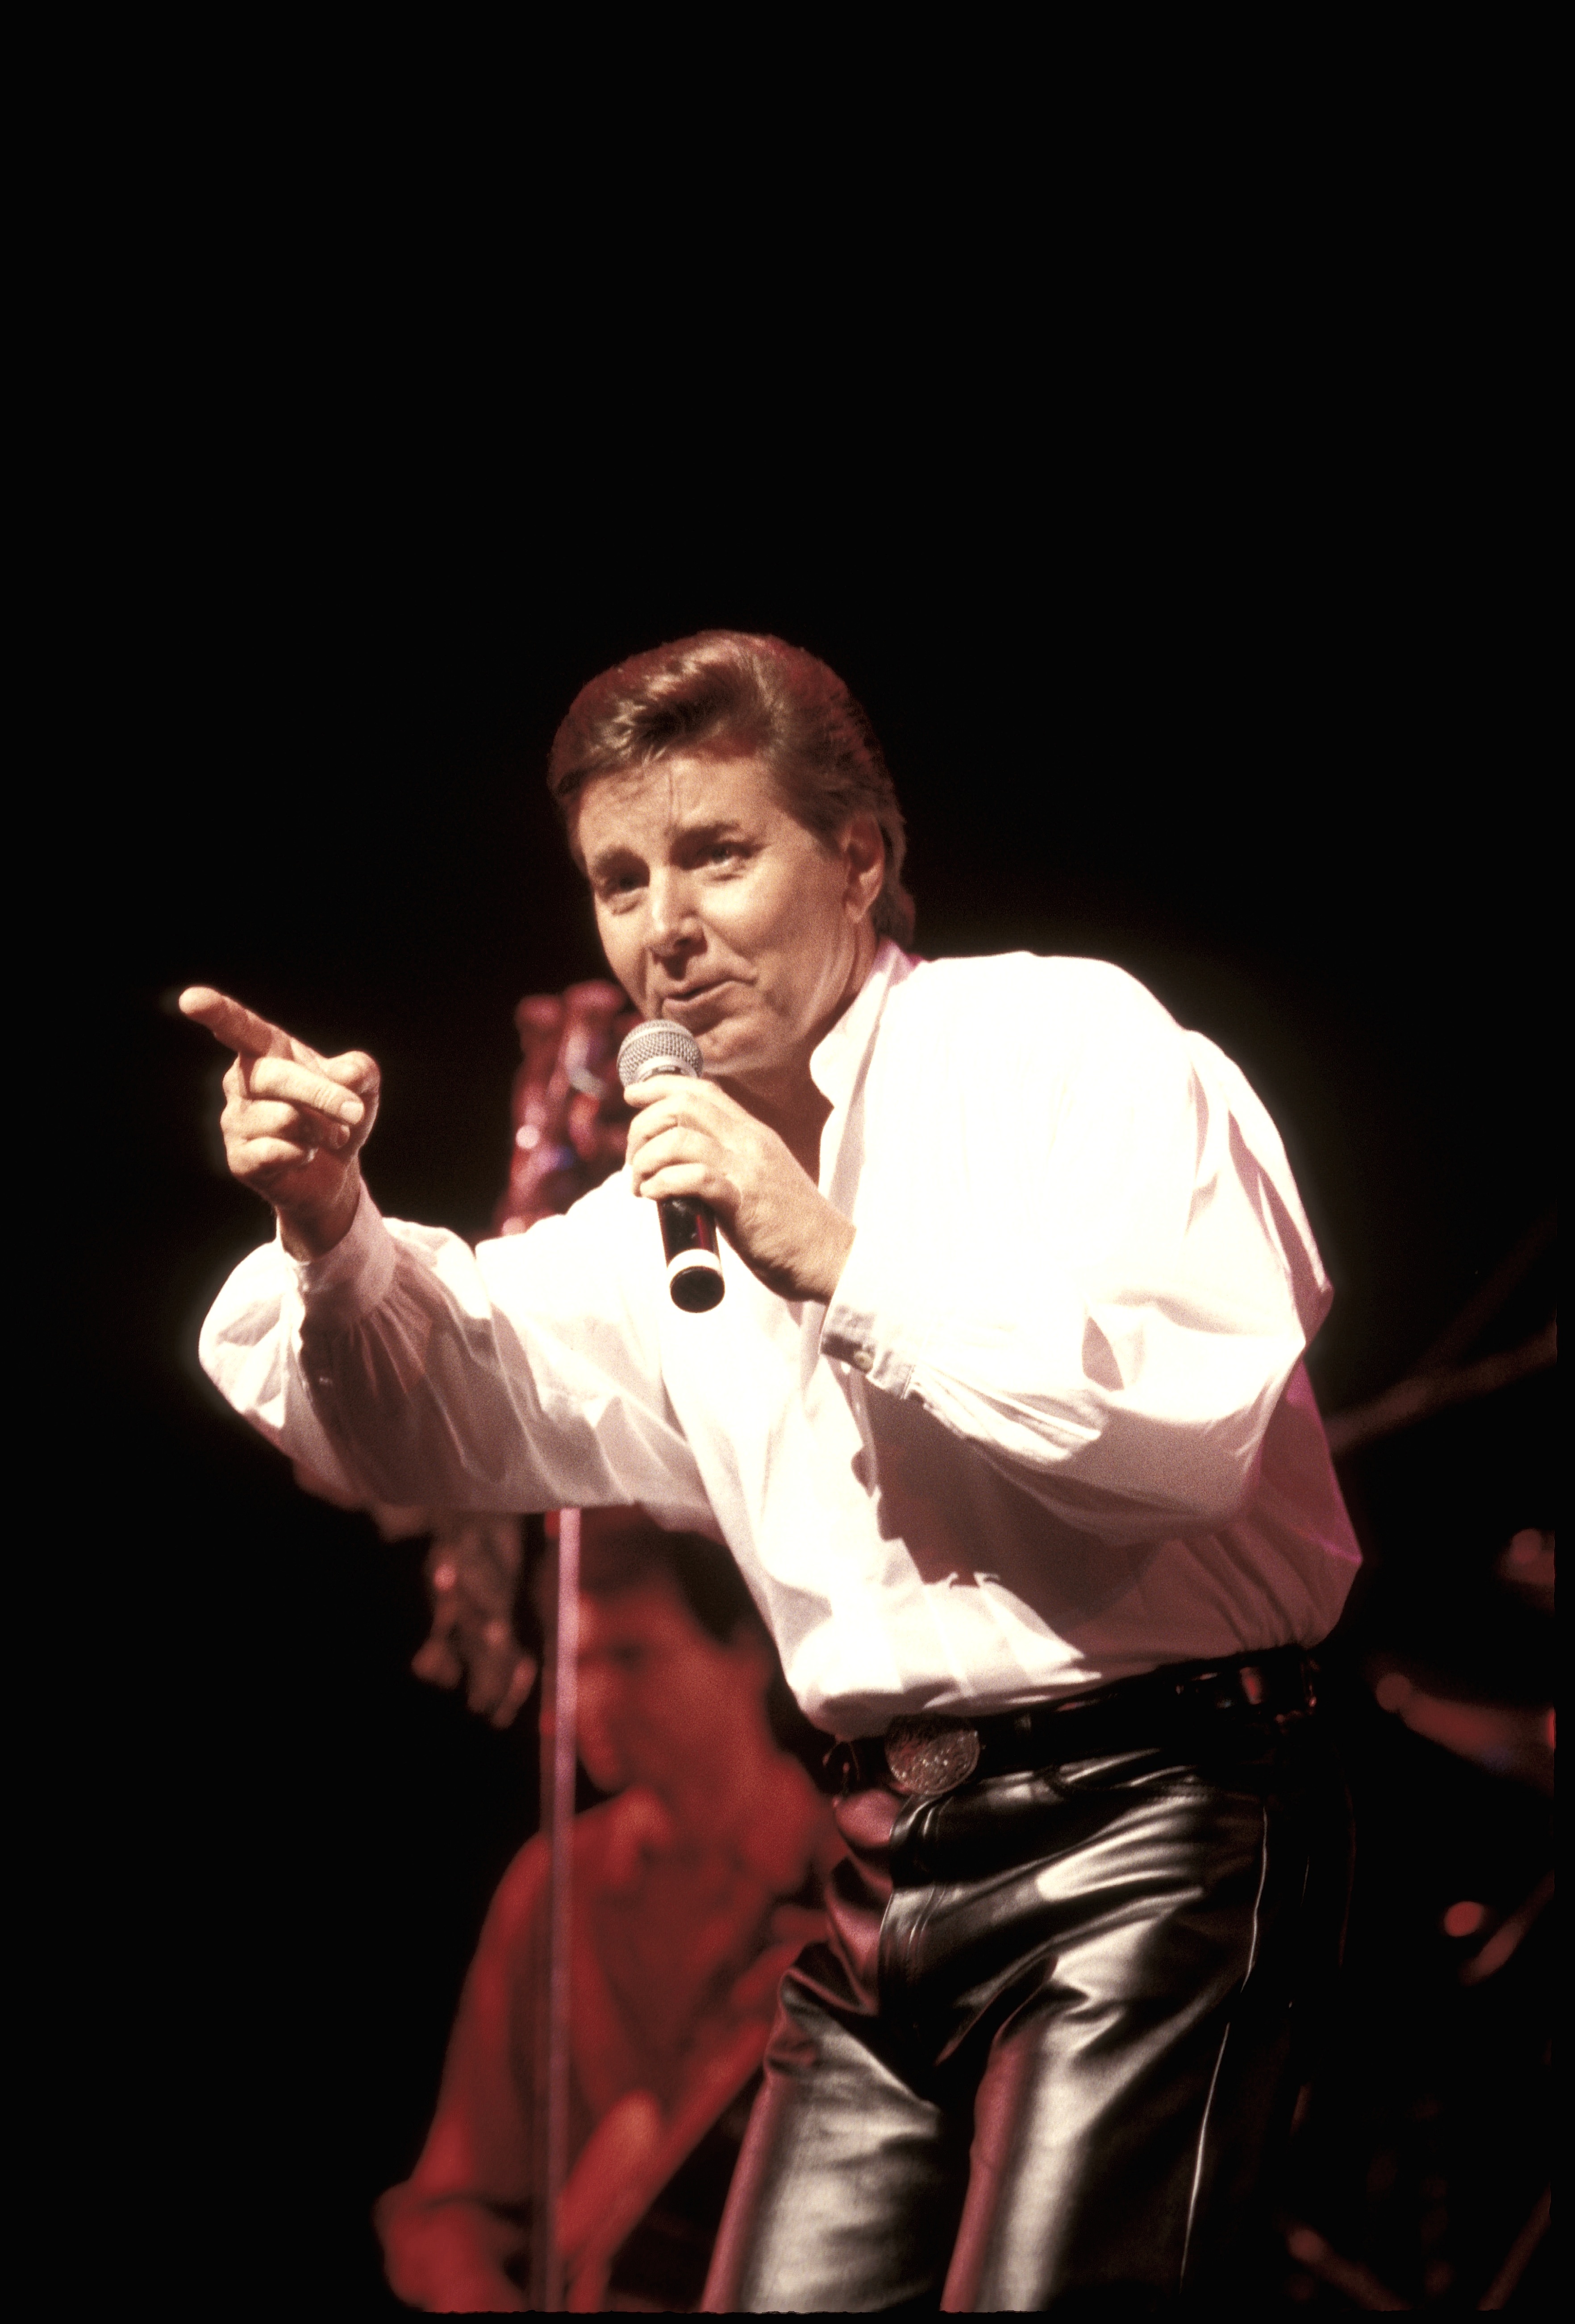 Bobby Sherman performing at a live concert in 1998 | Source: Getty Images